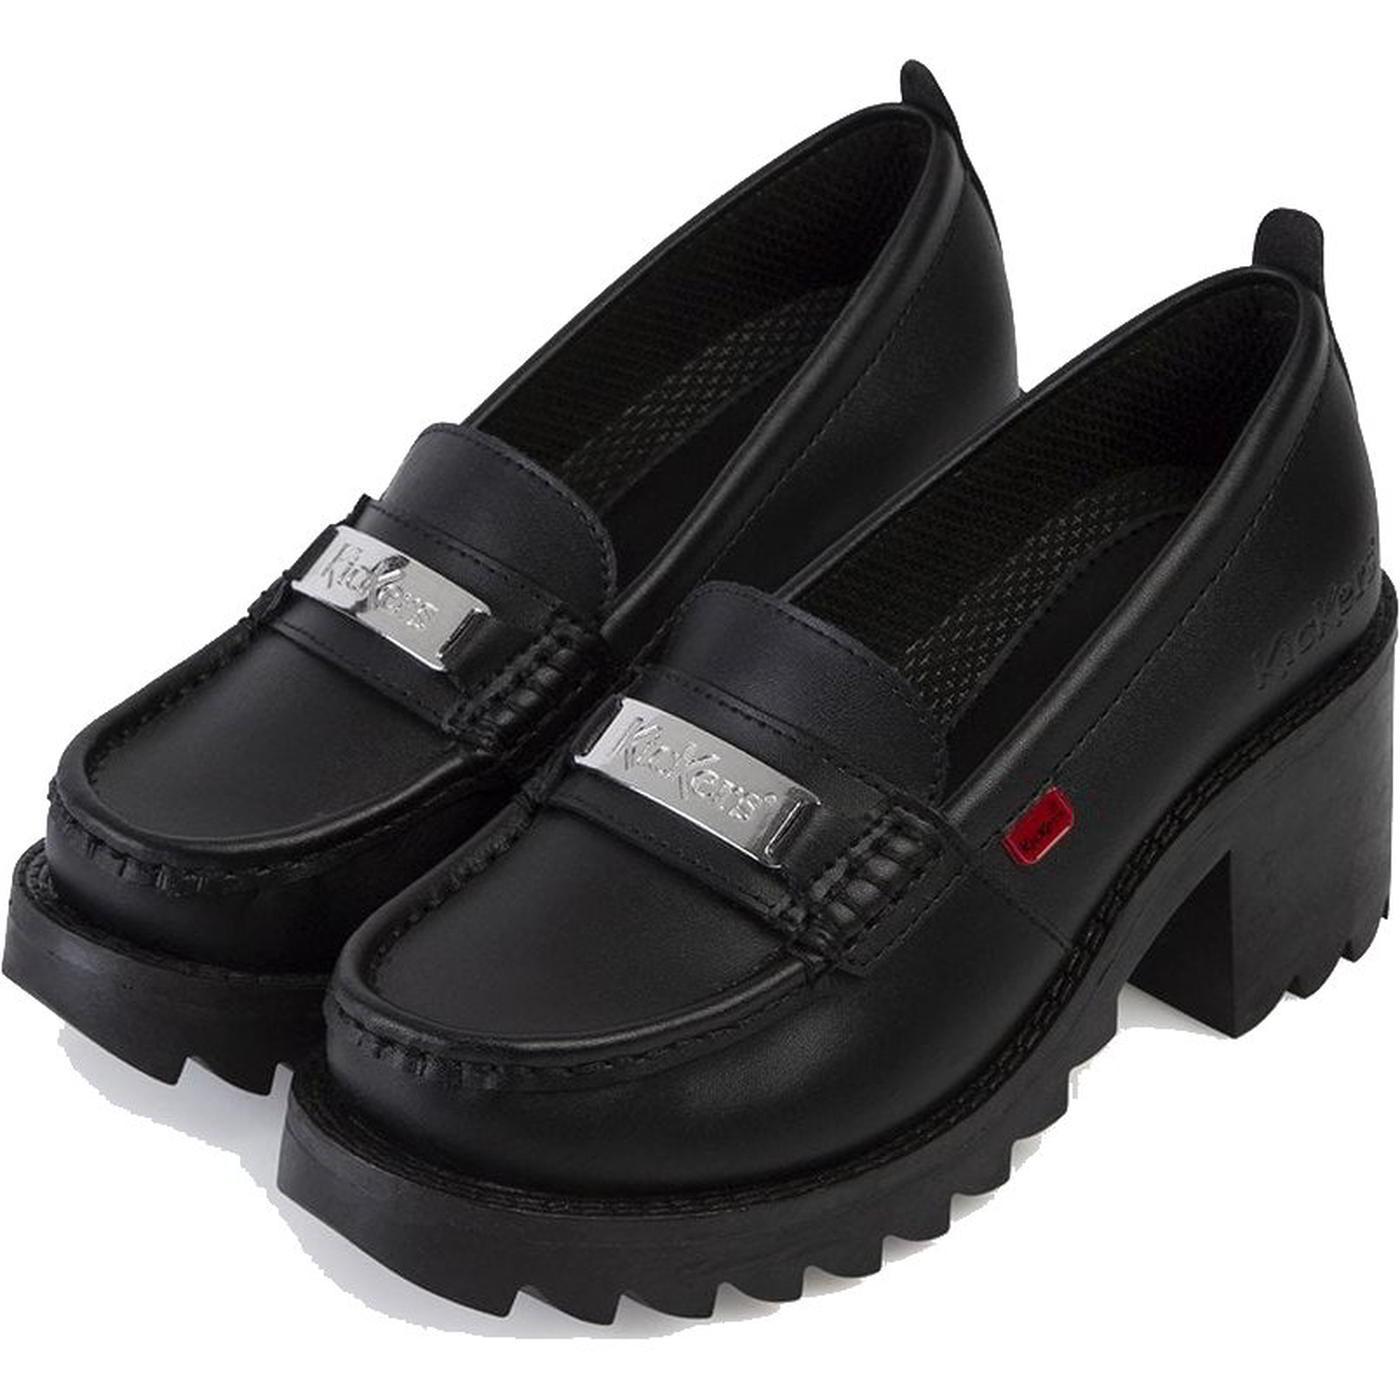 GIRLS BOOTLEG BY CLARKS TIZZ ACE RIPTAPE STRAP LEATHER BLACK CASUAL SCHOOL SHOES